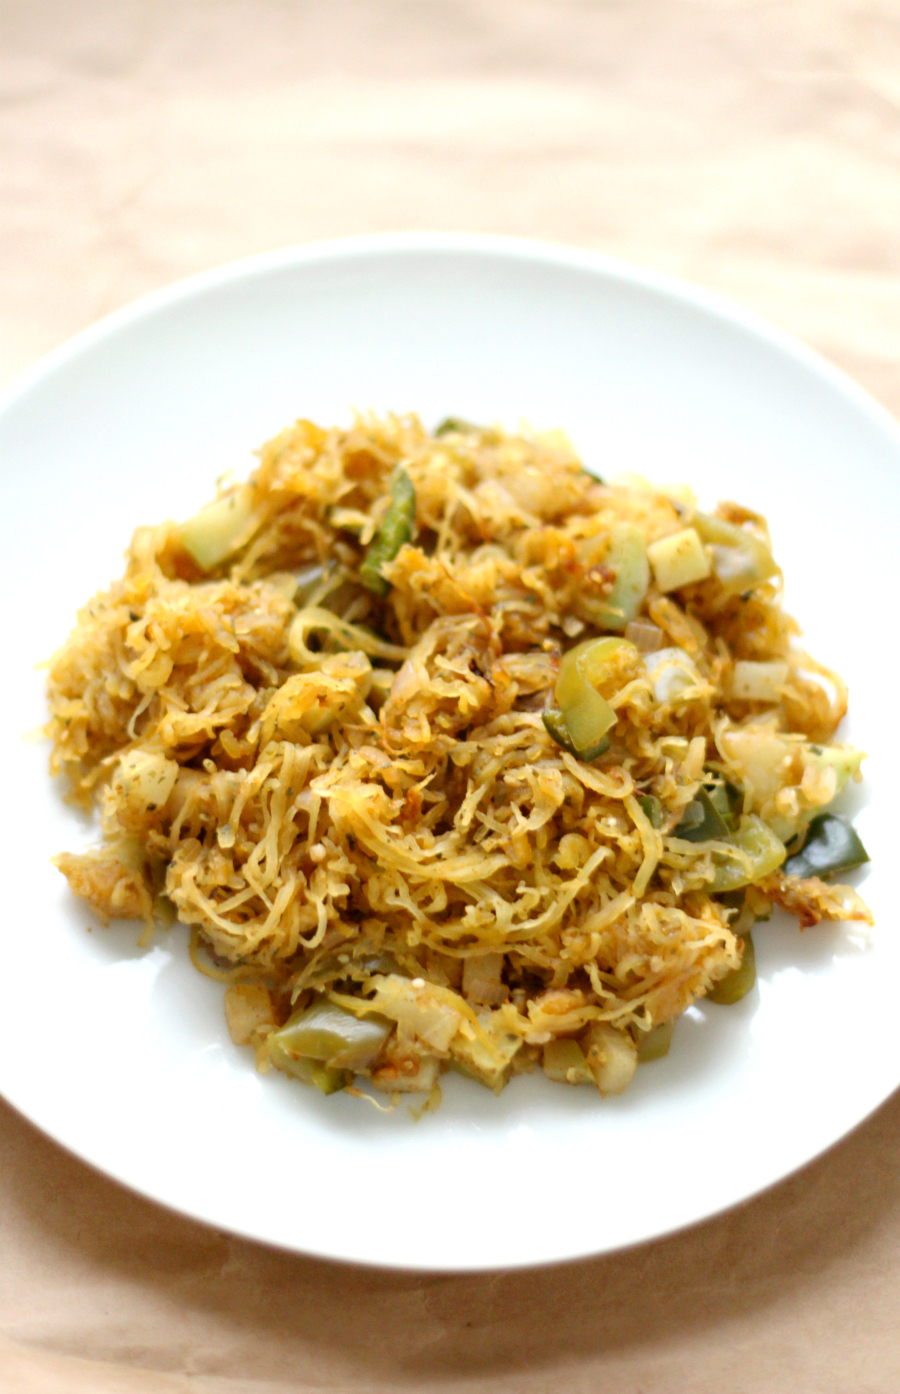 Mexican Spaghetti Squash Hash Browns (Gluten-Free, Vegan, Paleo) | Strength and Sunshine @RebeccaGF666 A lighter take on the savory breakfast hash! This Mexican Spaghetti Squash Hash Browns recipe is gluten-free, vegan, paleo, allergy-friendly, and easy to whip up! A healthy and veggie-packed meal to start your day off right and with a little spice! 